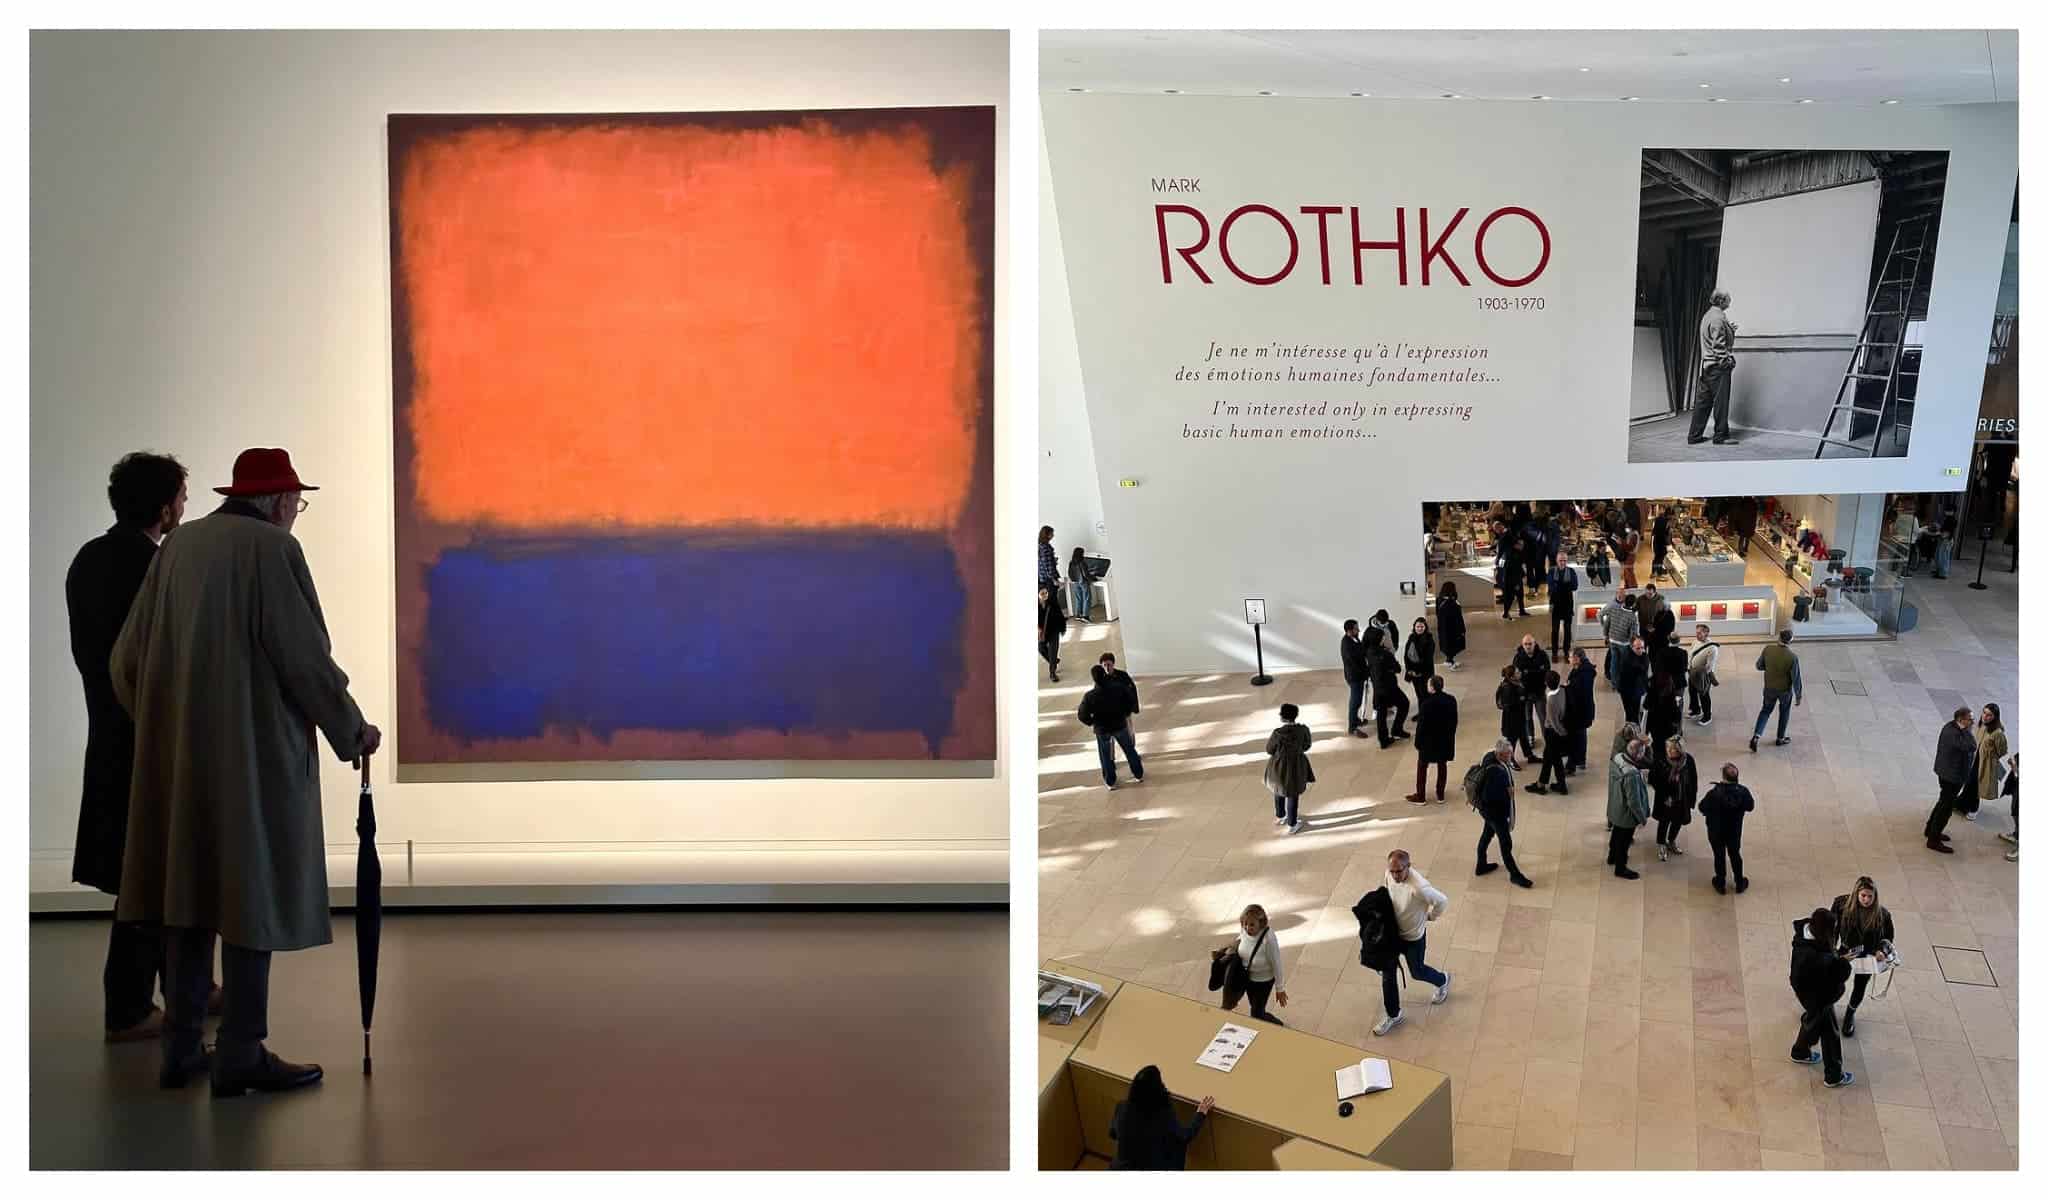 Mark Rothko exhibit in Foundation Louis Vuitton, left: a paiting by mark rothko admired by two men. Right: the hall of Foundation Louis Vuitton with a poster of Mart Rothko exhibit and a lot of museum visitors